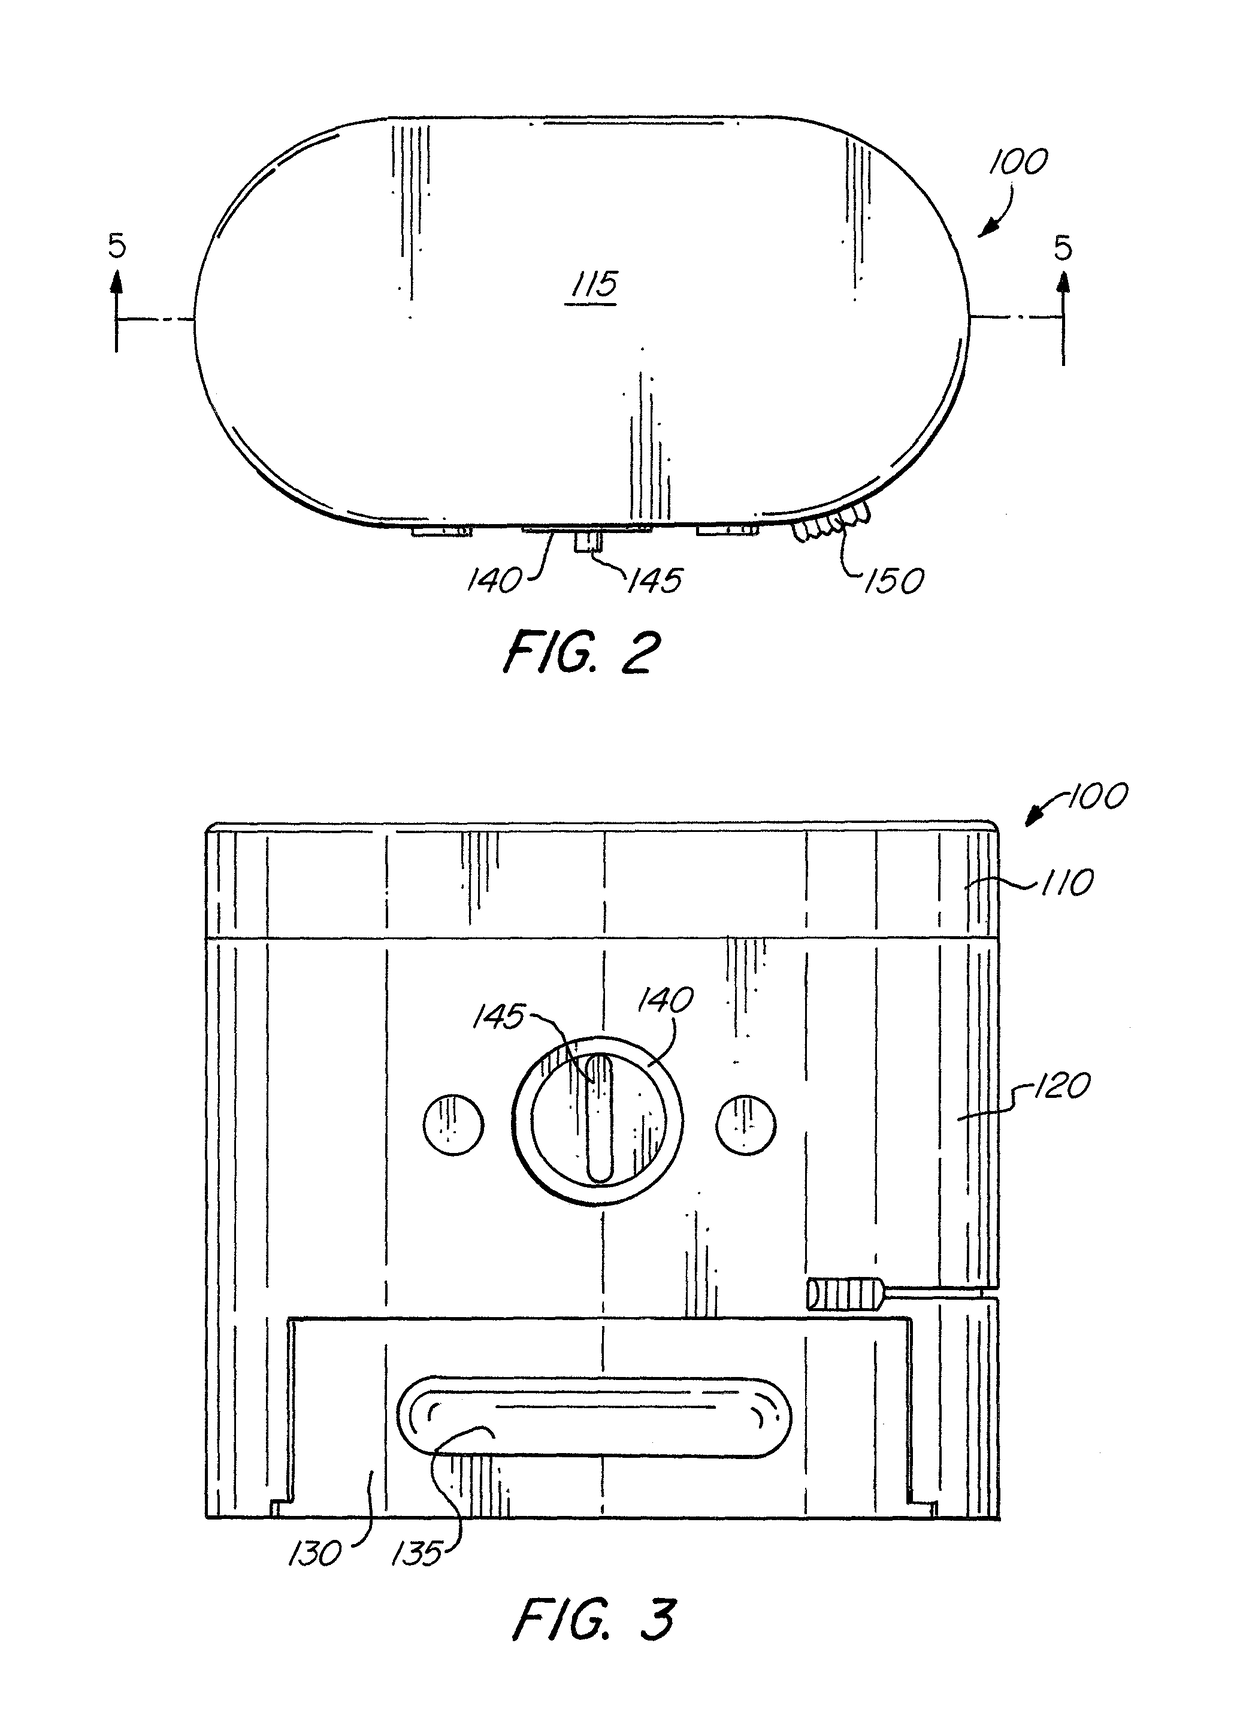 Solid soap fragment melting apparatus and method